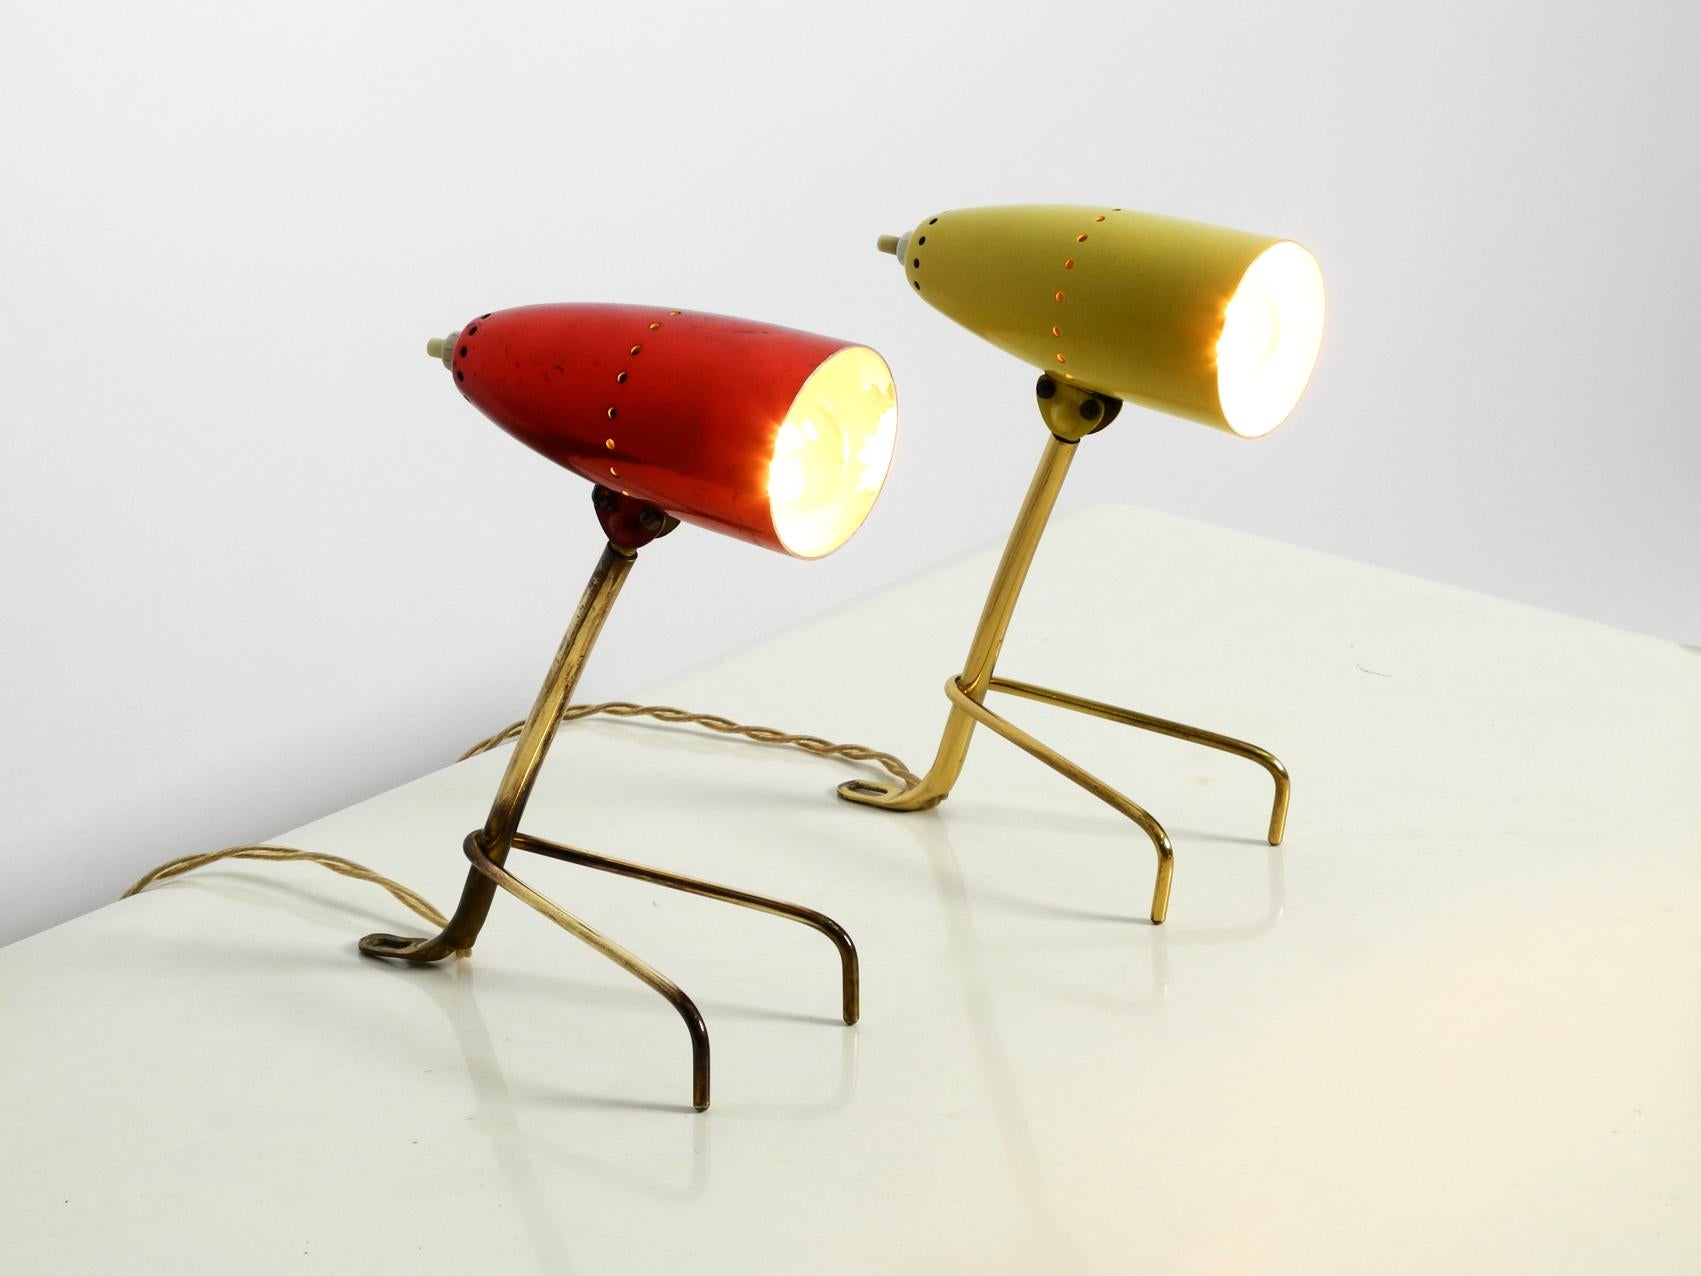 Stunning Pair of Mid-Century Modern Brass Crowfoot Table Lamps, Made in Austria 3